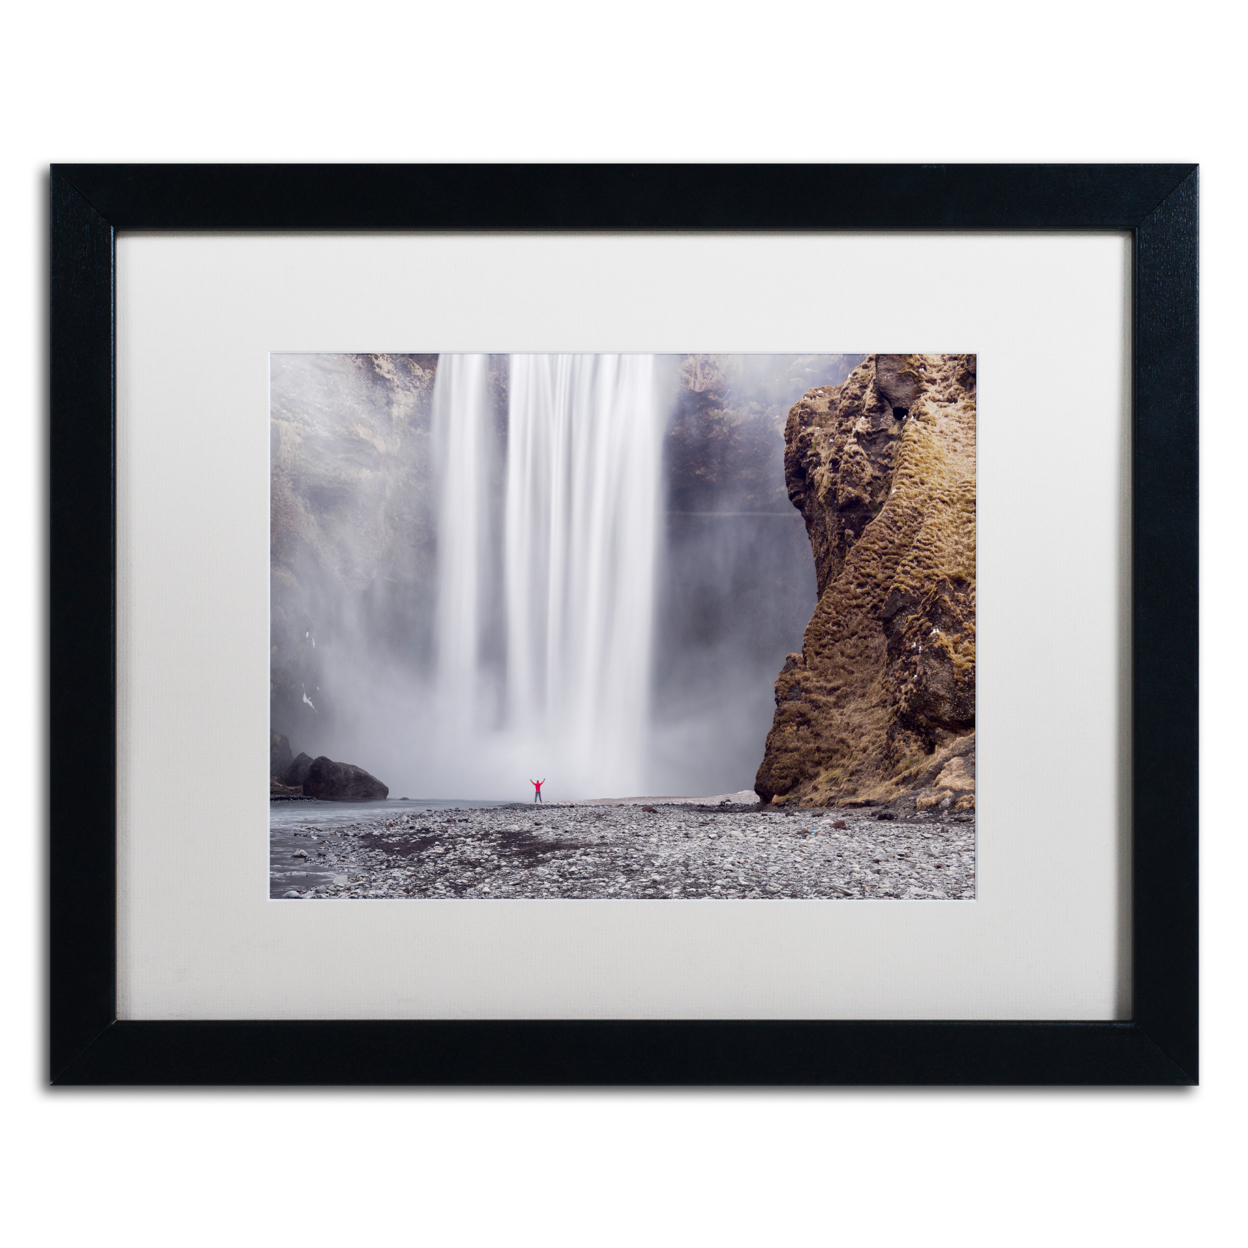 Michael Blanchette Photography 'X Marks The Spot' Black Wooden Framed Art 18 X 22 Inches